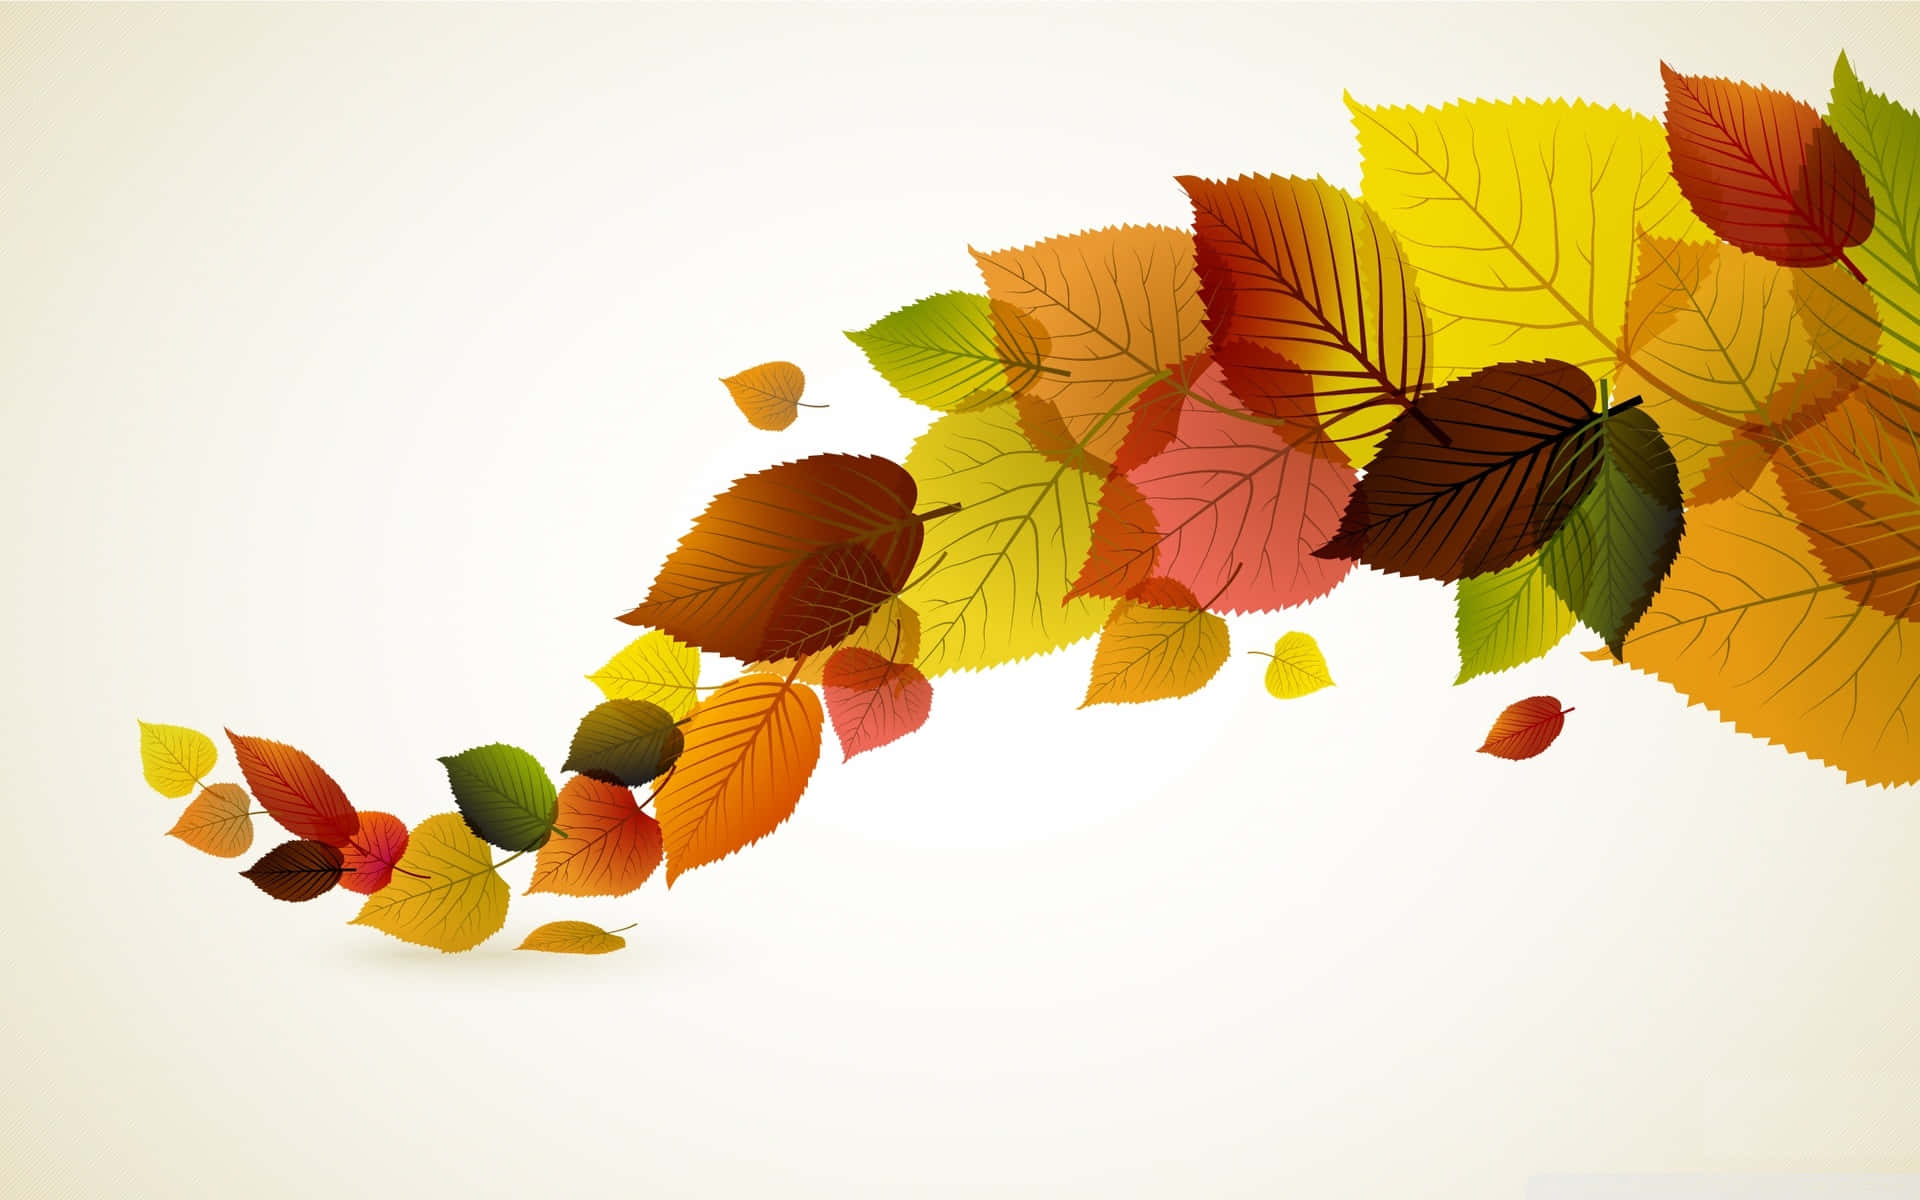 "Take in the beauty of Autumn Foliage!" Wallpaper